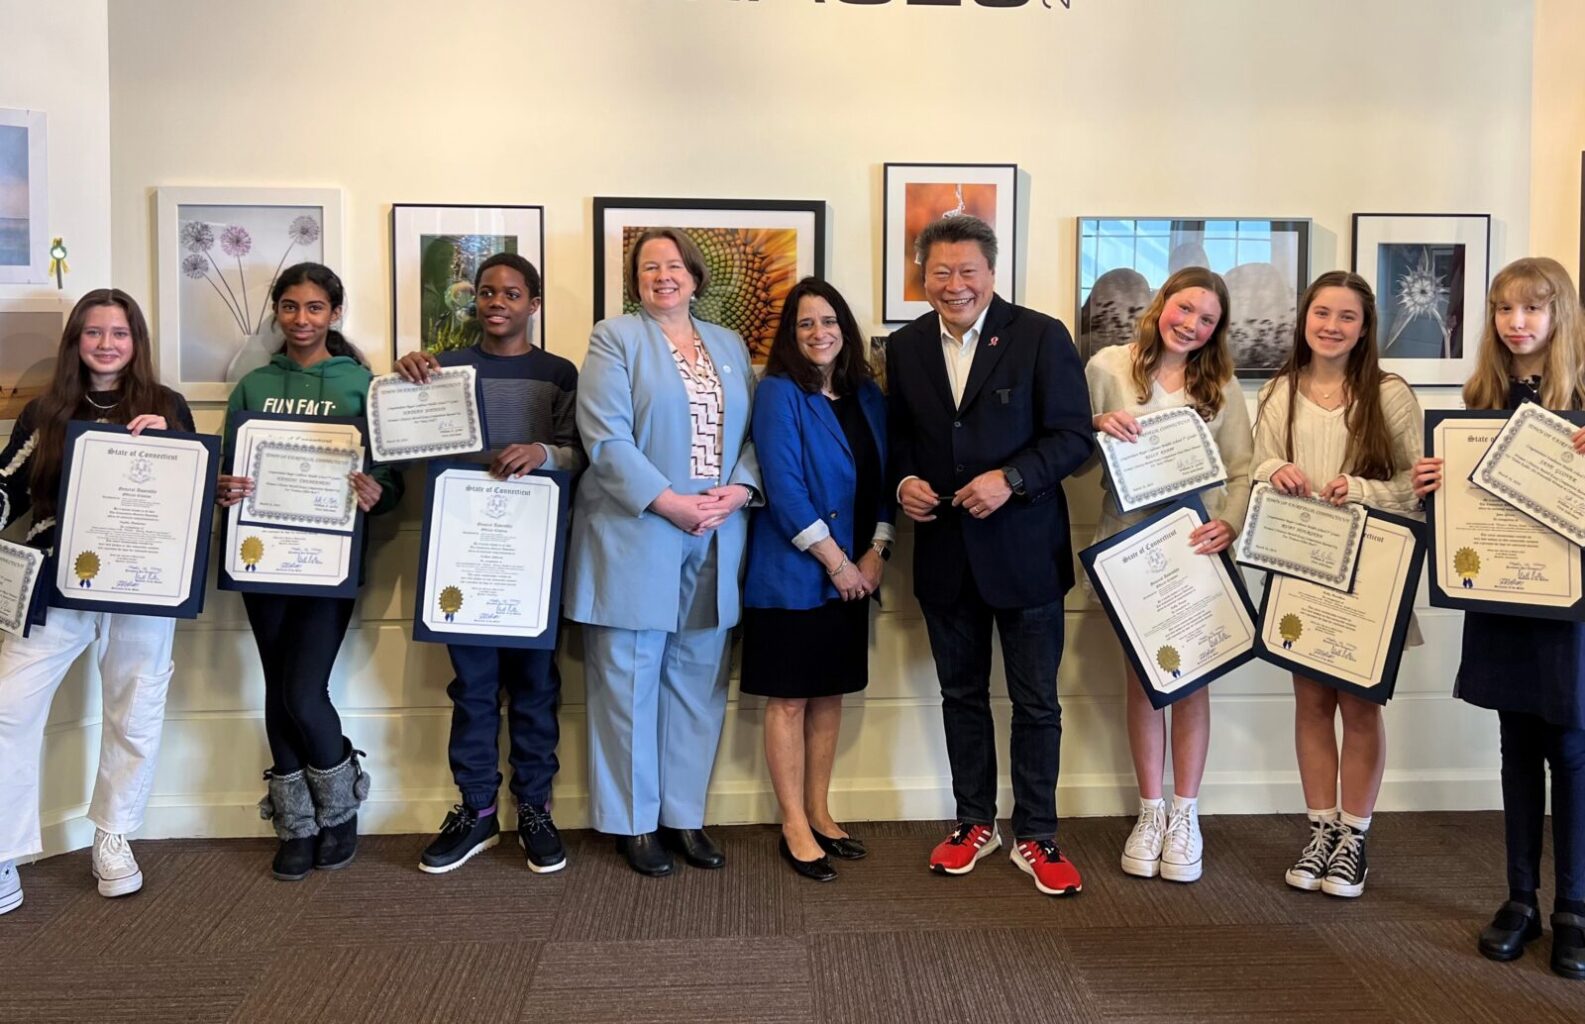 Fairfield’s Senator Tony Hwang Celebrates Middle School Honorees in Women's History Month Essay Contest